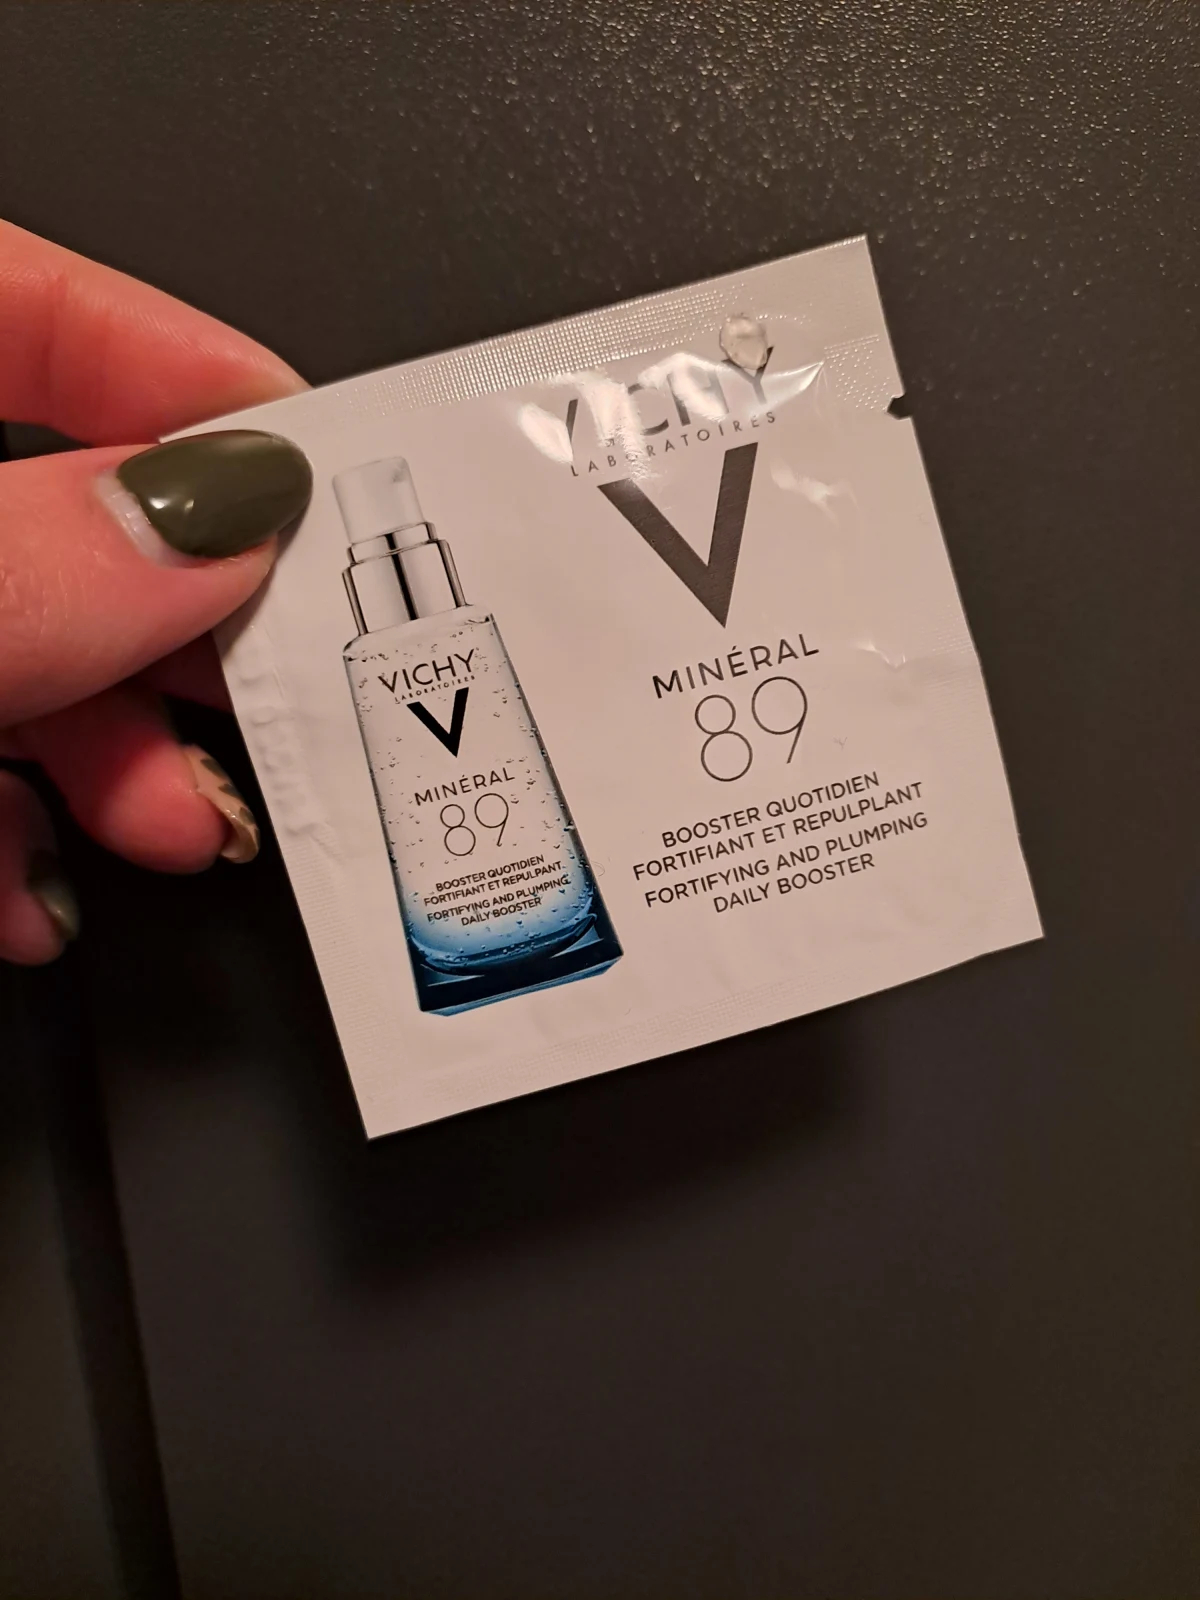 Vichy mineral 89 - review image